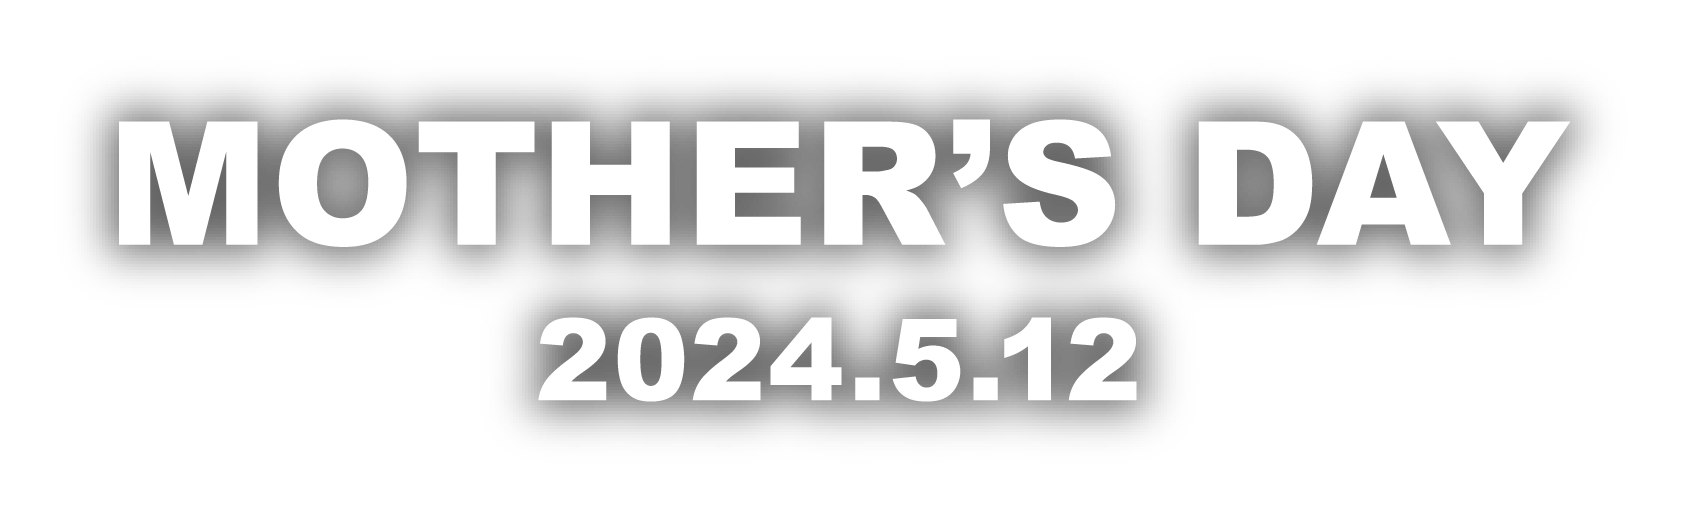 MOTHER’S DAY 2020.5.12